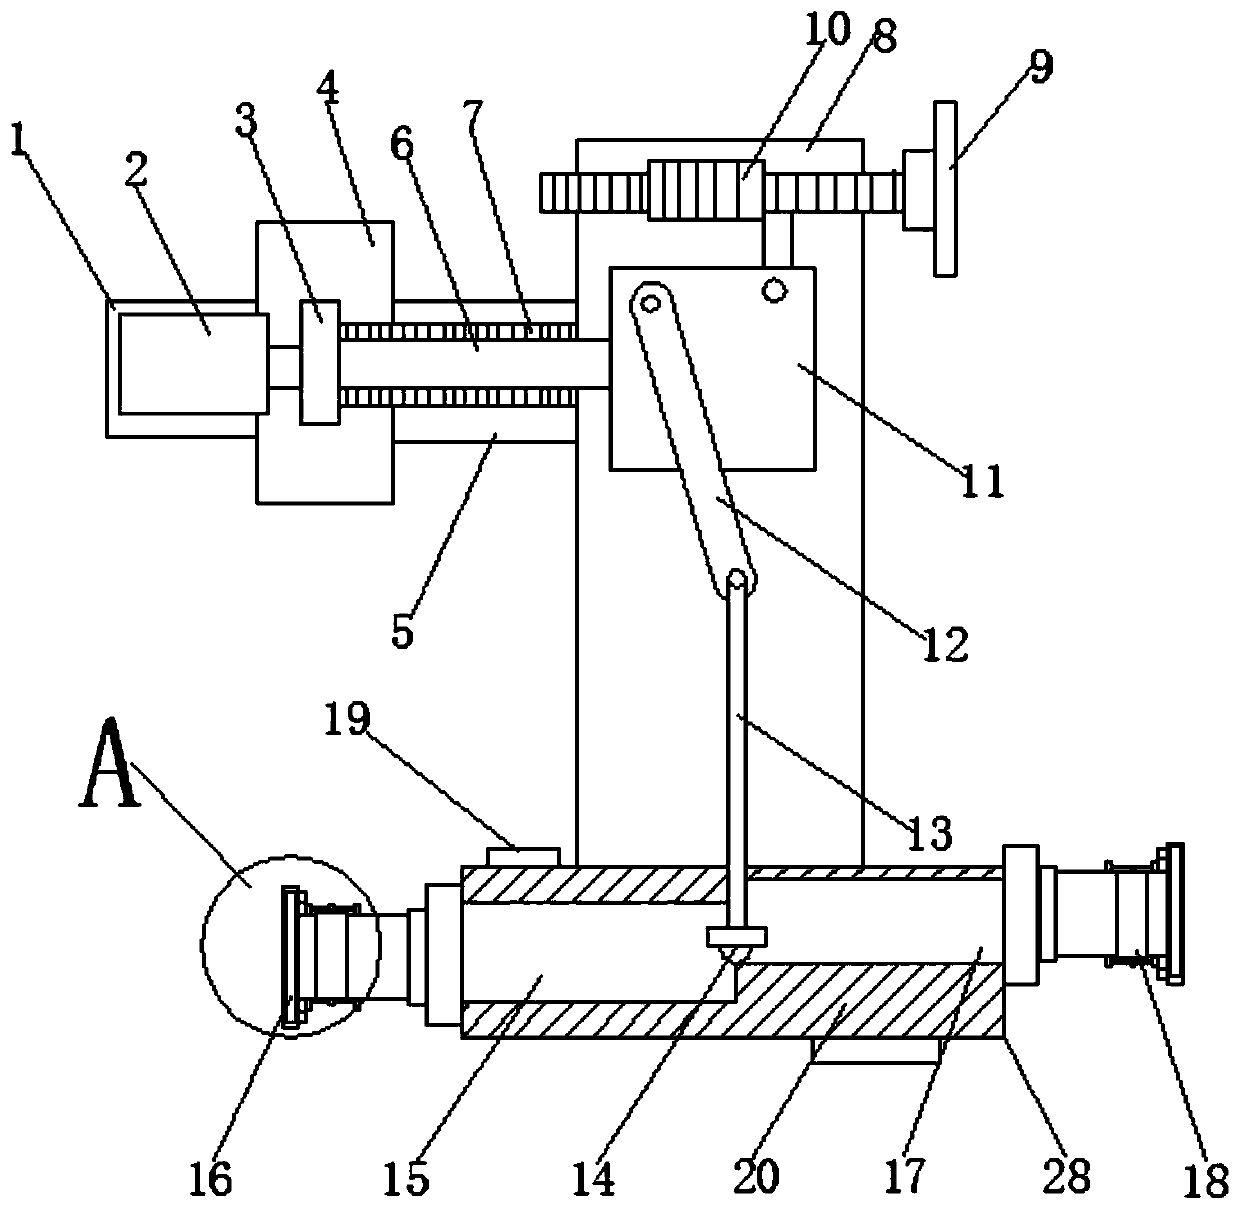 Valve executor with stable mounting structure